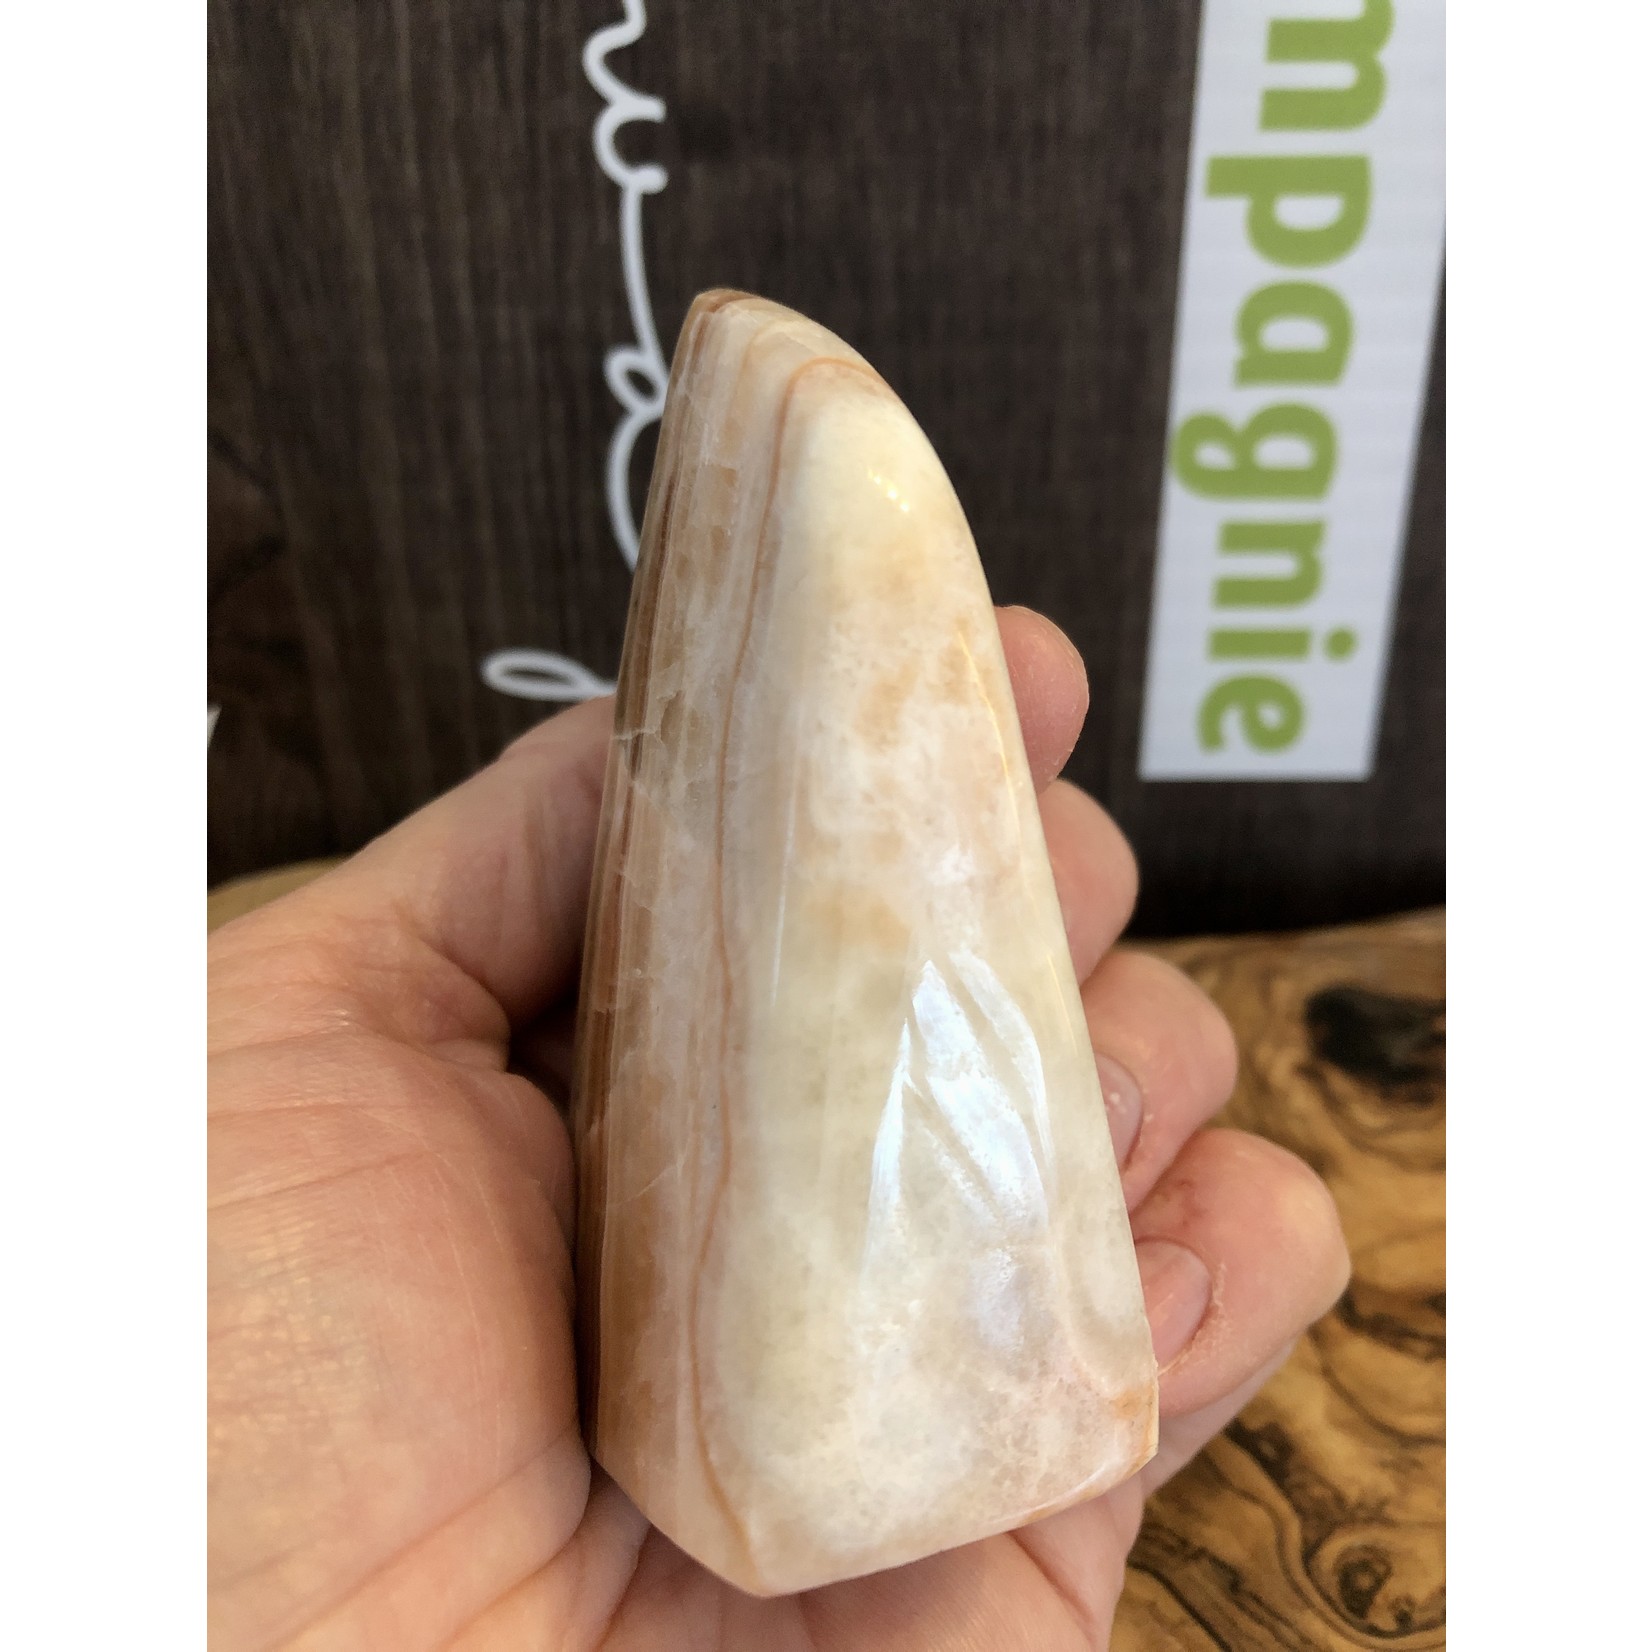 soft banded calcite polished, orange calcite, helps you access higher guidance and its connection to the whole